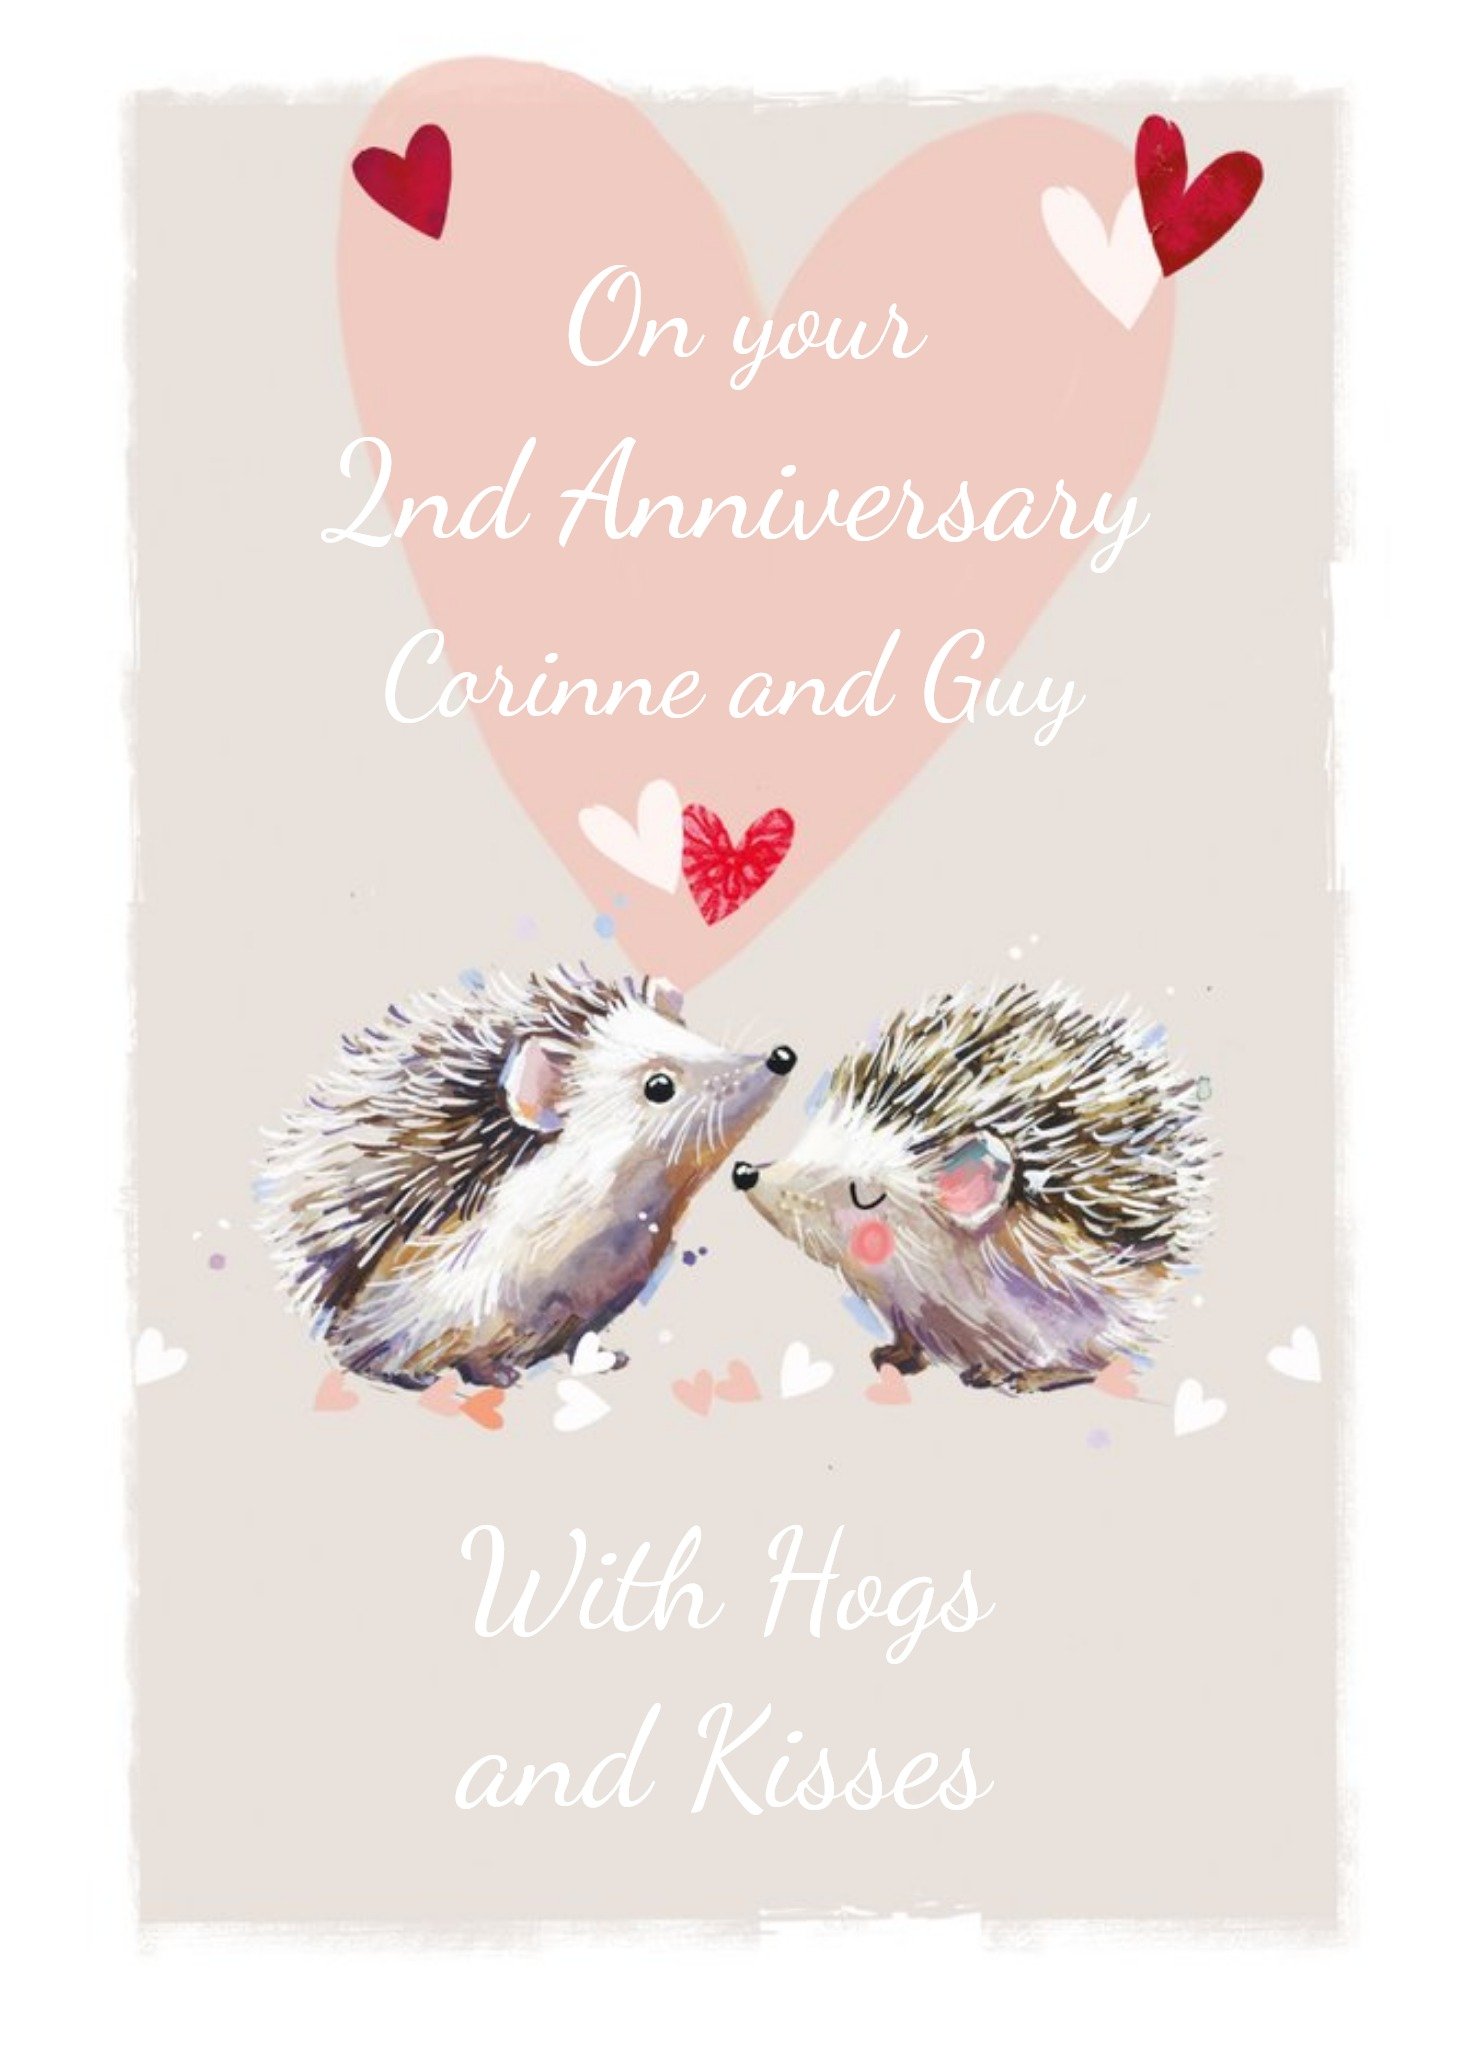 Ling Design Hogs And Kisses Hedgehogs 2nd Anniversary Card Ecard